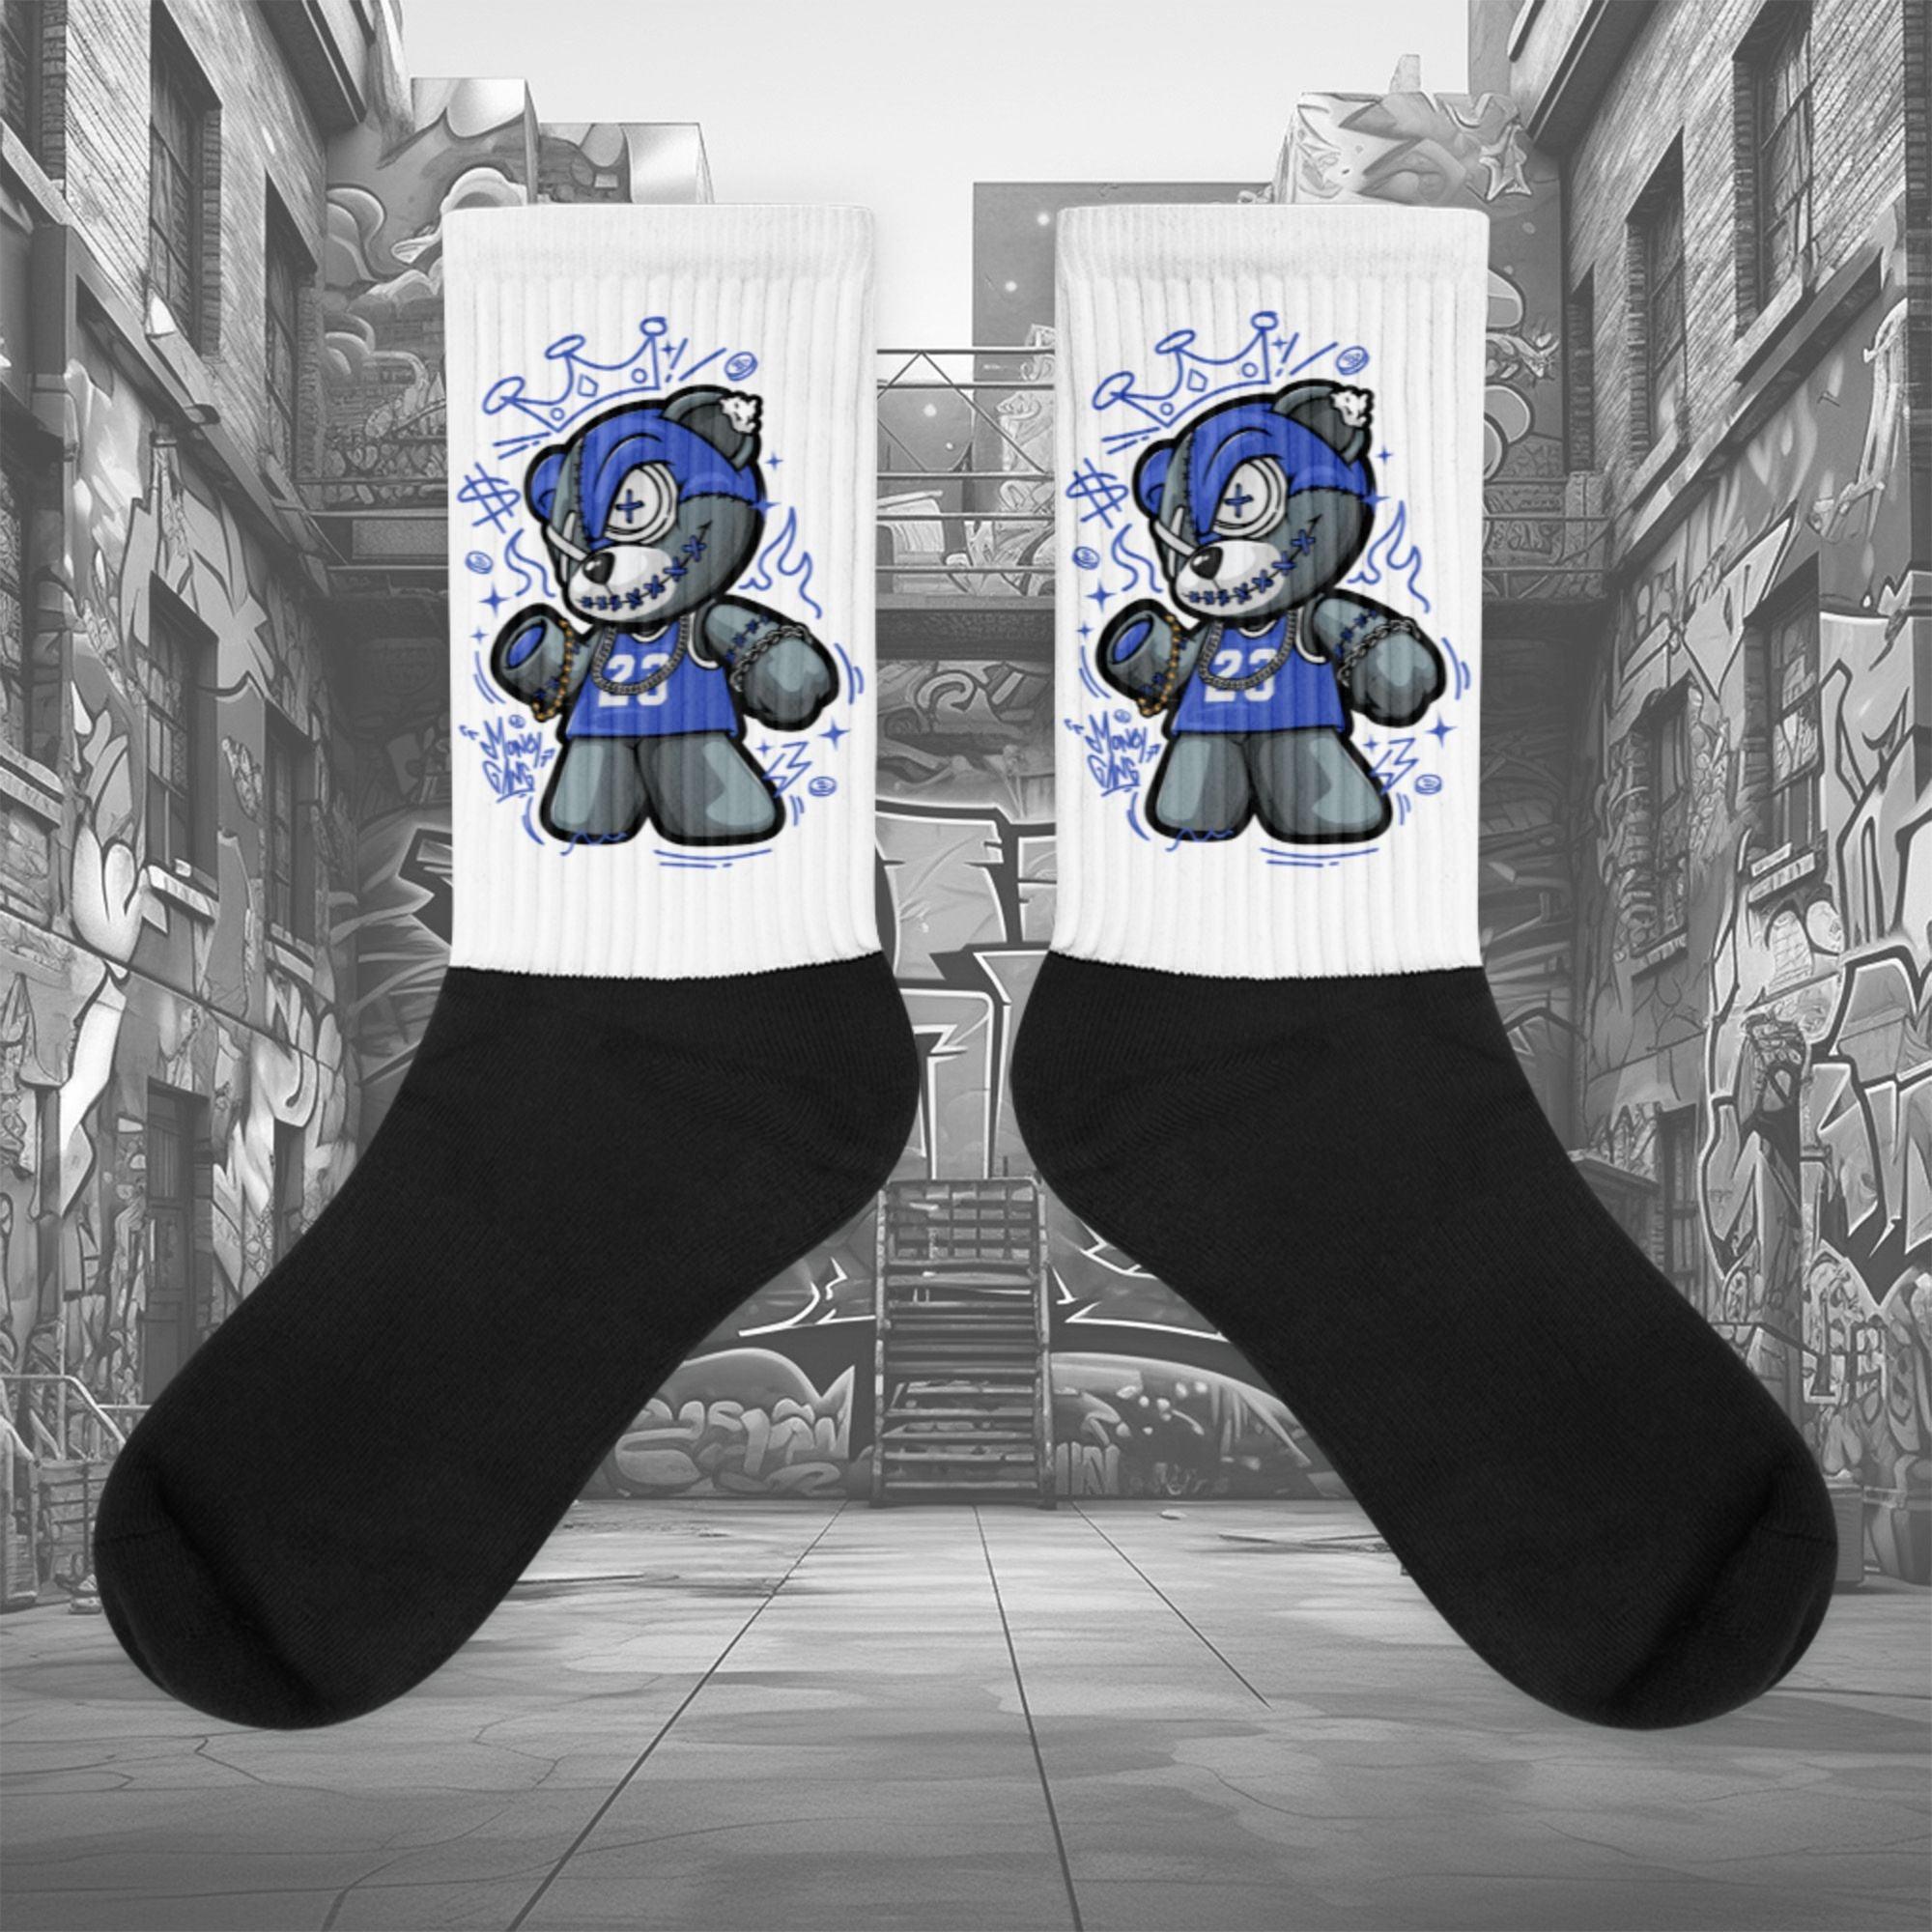 Showcases the view of the socks, highlighting the vibrant ' MEDUSA ' design, which perfectly complements the Nike Dunk Disrupt 2 Hyper Royal sneakers. The intricate pattern and color scheme inspired by the  theme are prominently displayed.  Focusing on the ribbed leg , cusioned bottoms and the snug fit of the socks. This angle provides a clear view of the texture and quality of the material blend.